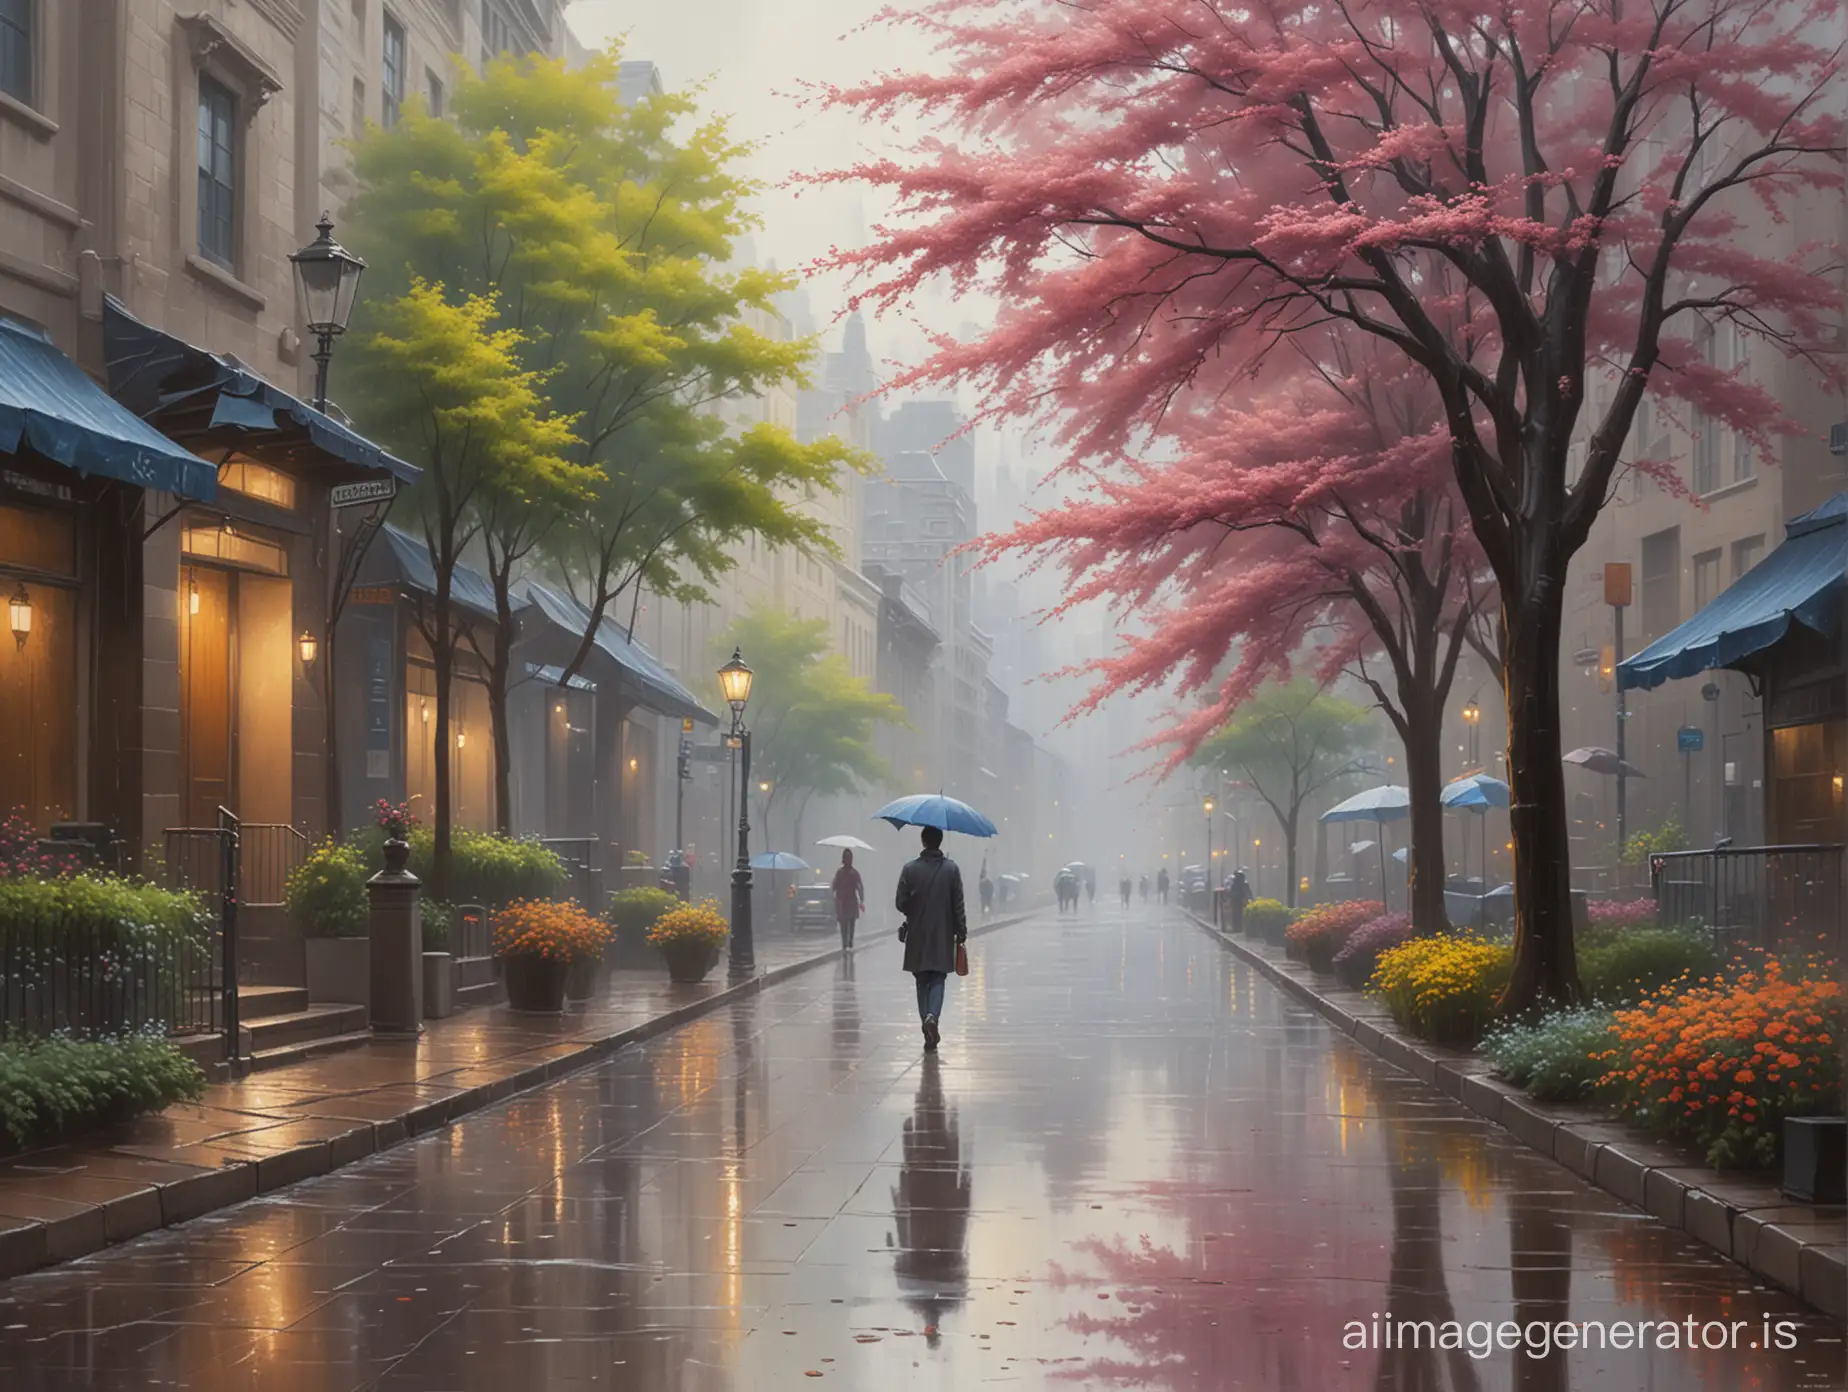 a painting of a person walking in the rain, a fine art painting, fantasy art, blossoming path to heaven, city morning, andy park, beautiful oil painting on canvas